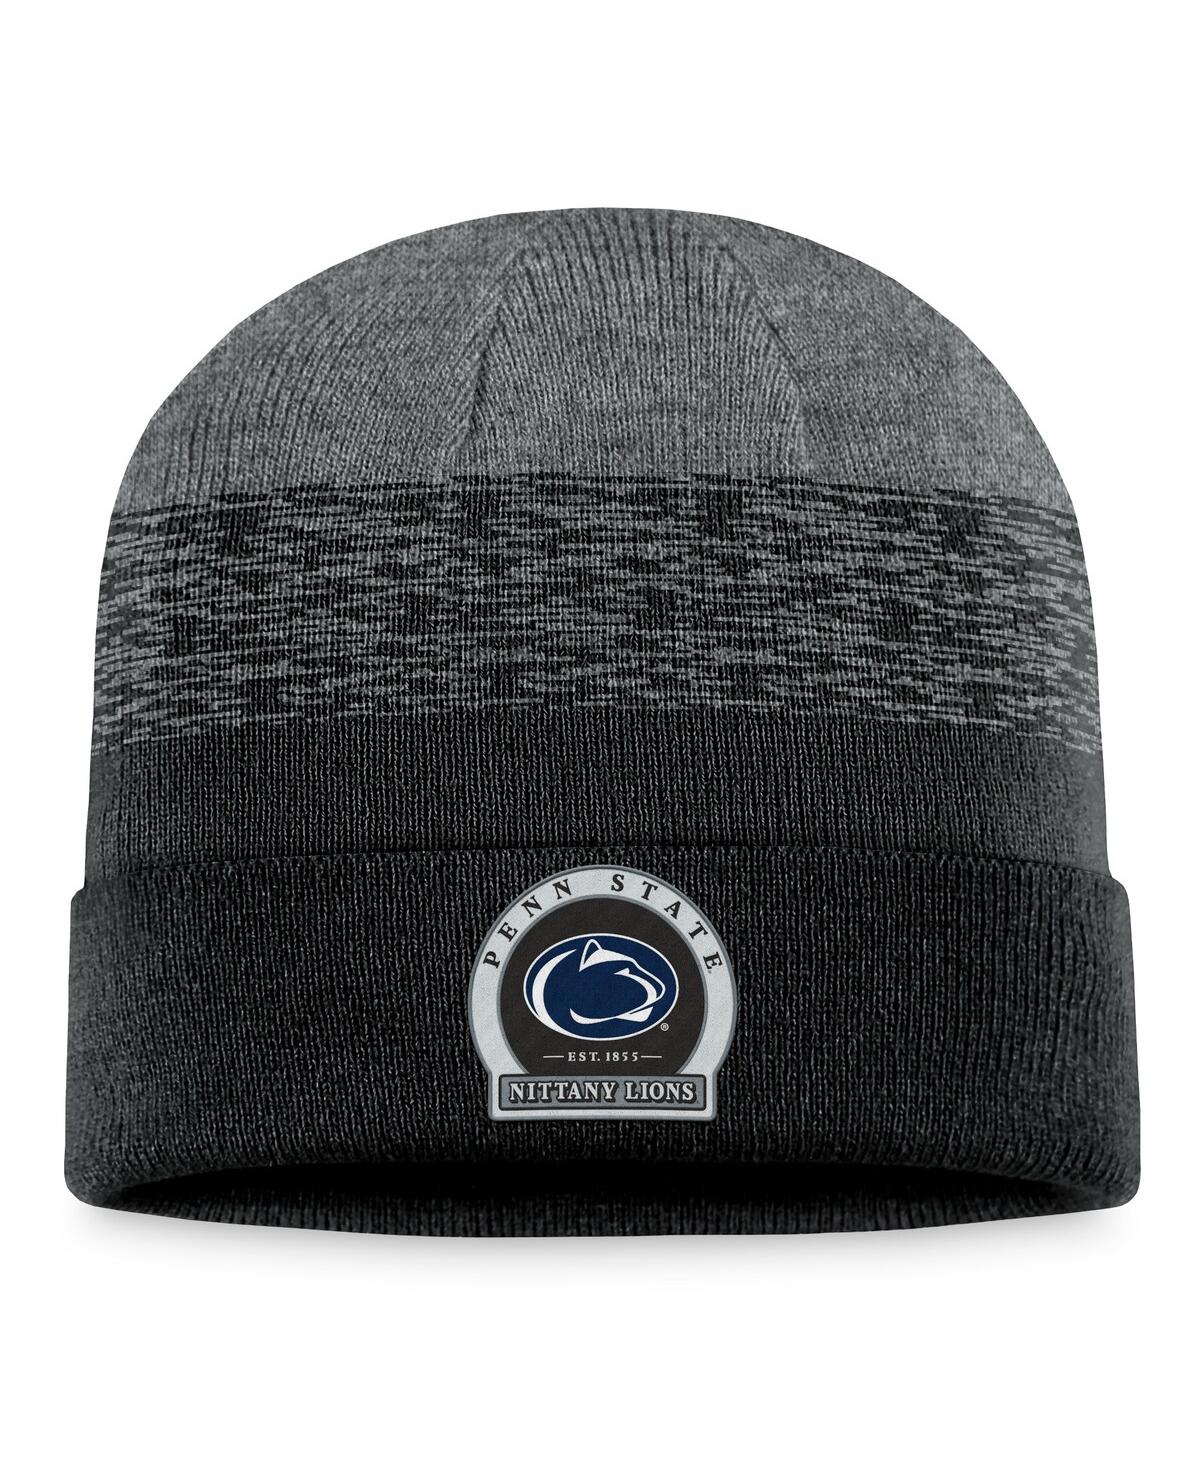 Top Of The World Men's  Heather Black Penn State Nittany Lions Frostbite Cuffed Knit Hat